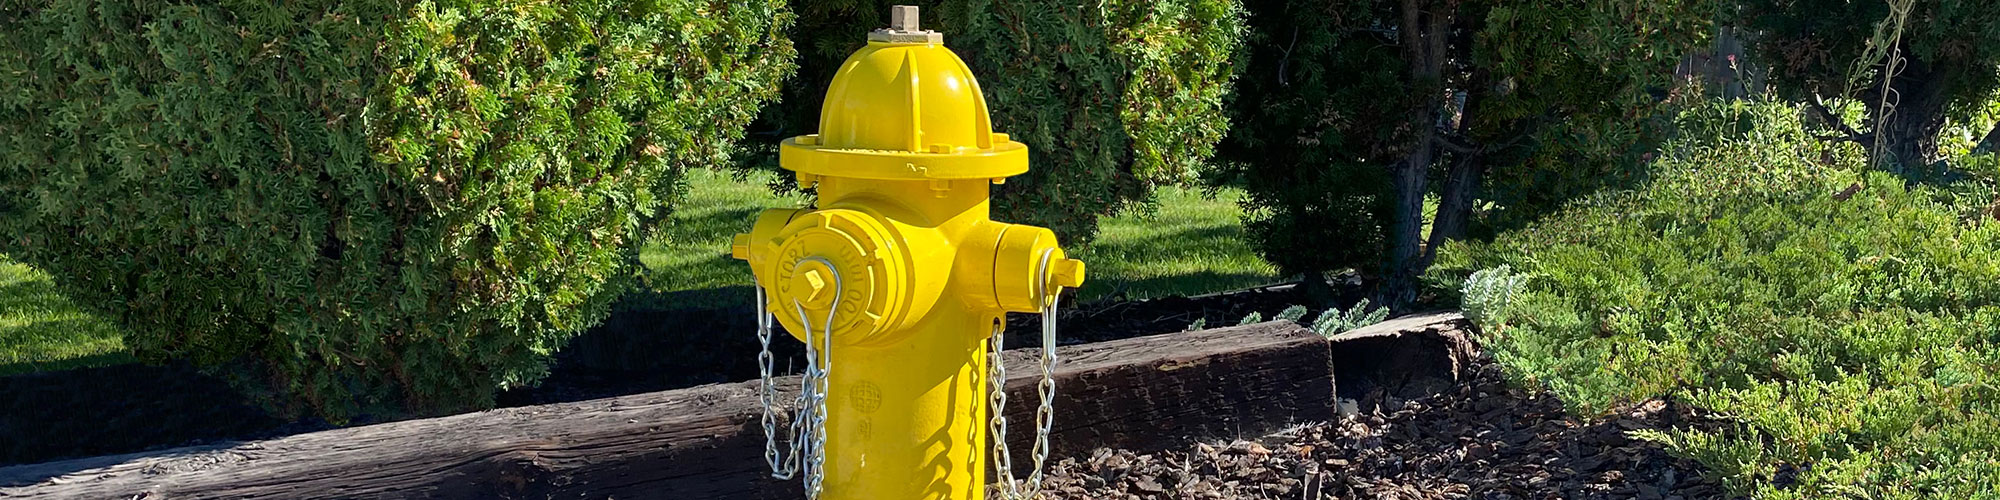 EJ WaterMaster yellow CD fire hydrant next to valve box cover in front of bushes